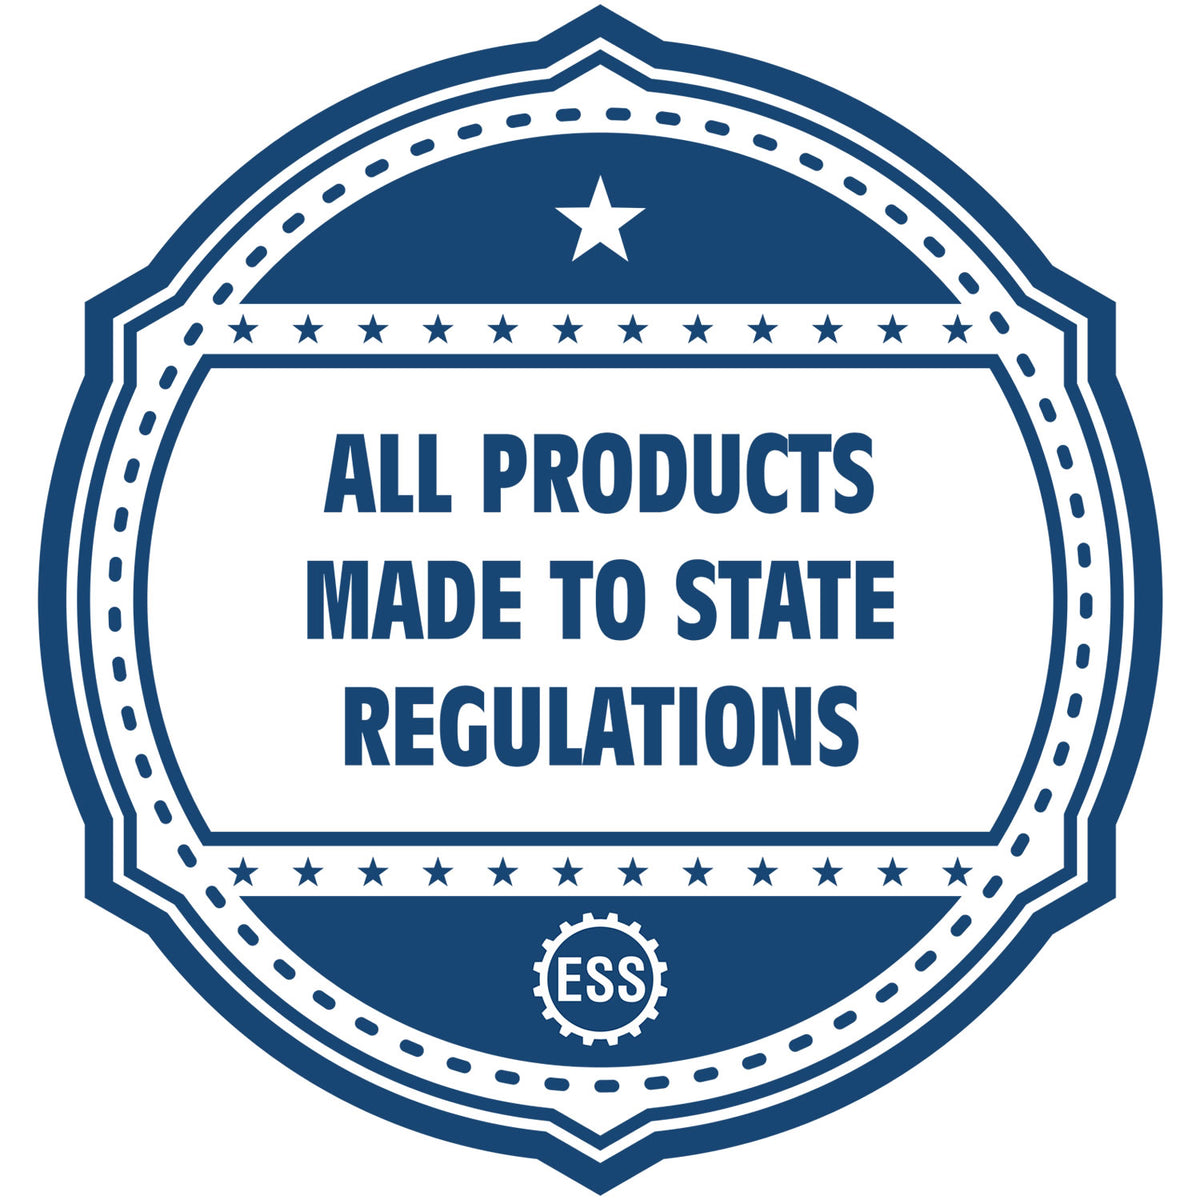 An icon or badge element for the MaxLight Premium Pre-Inked California State Seal Notarial Stamp showing that this product is made in compliance with state regulations.